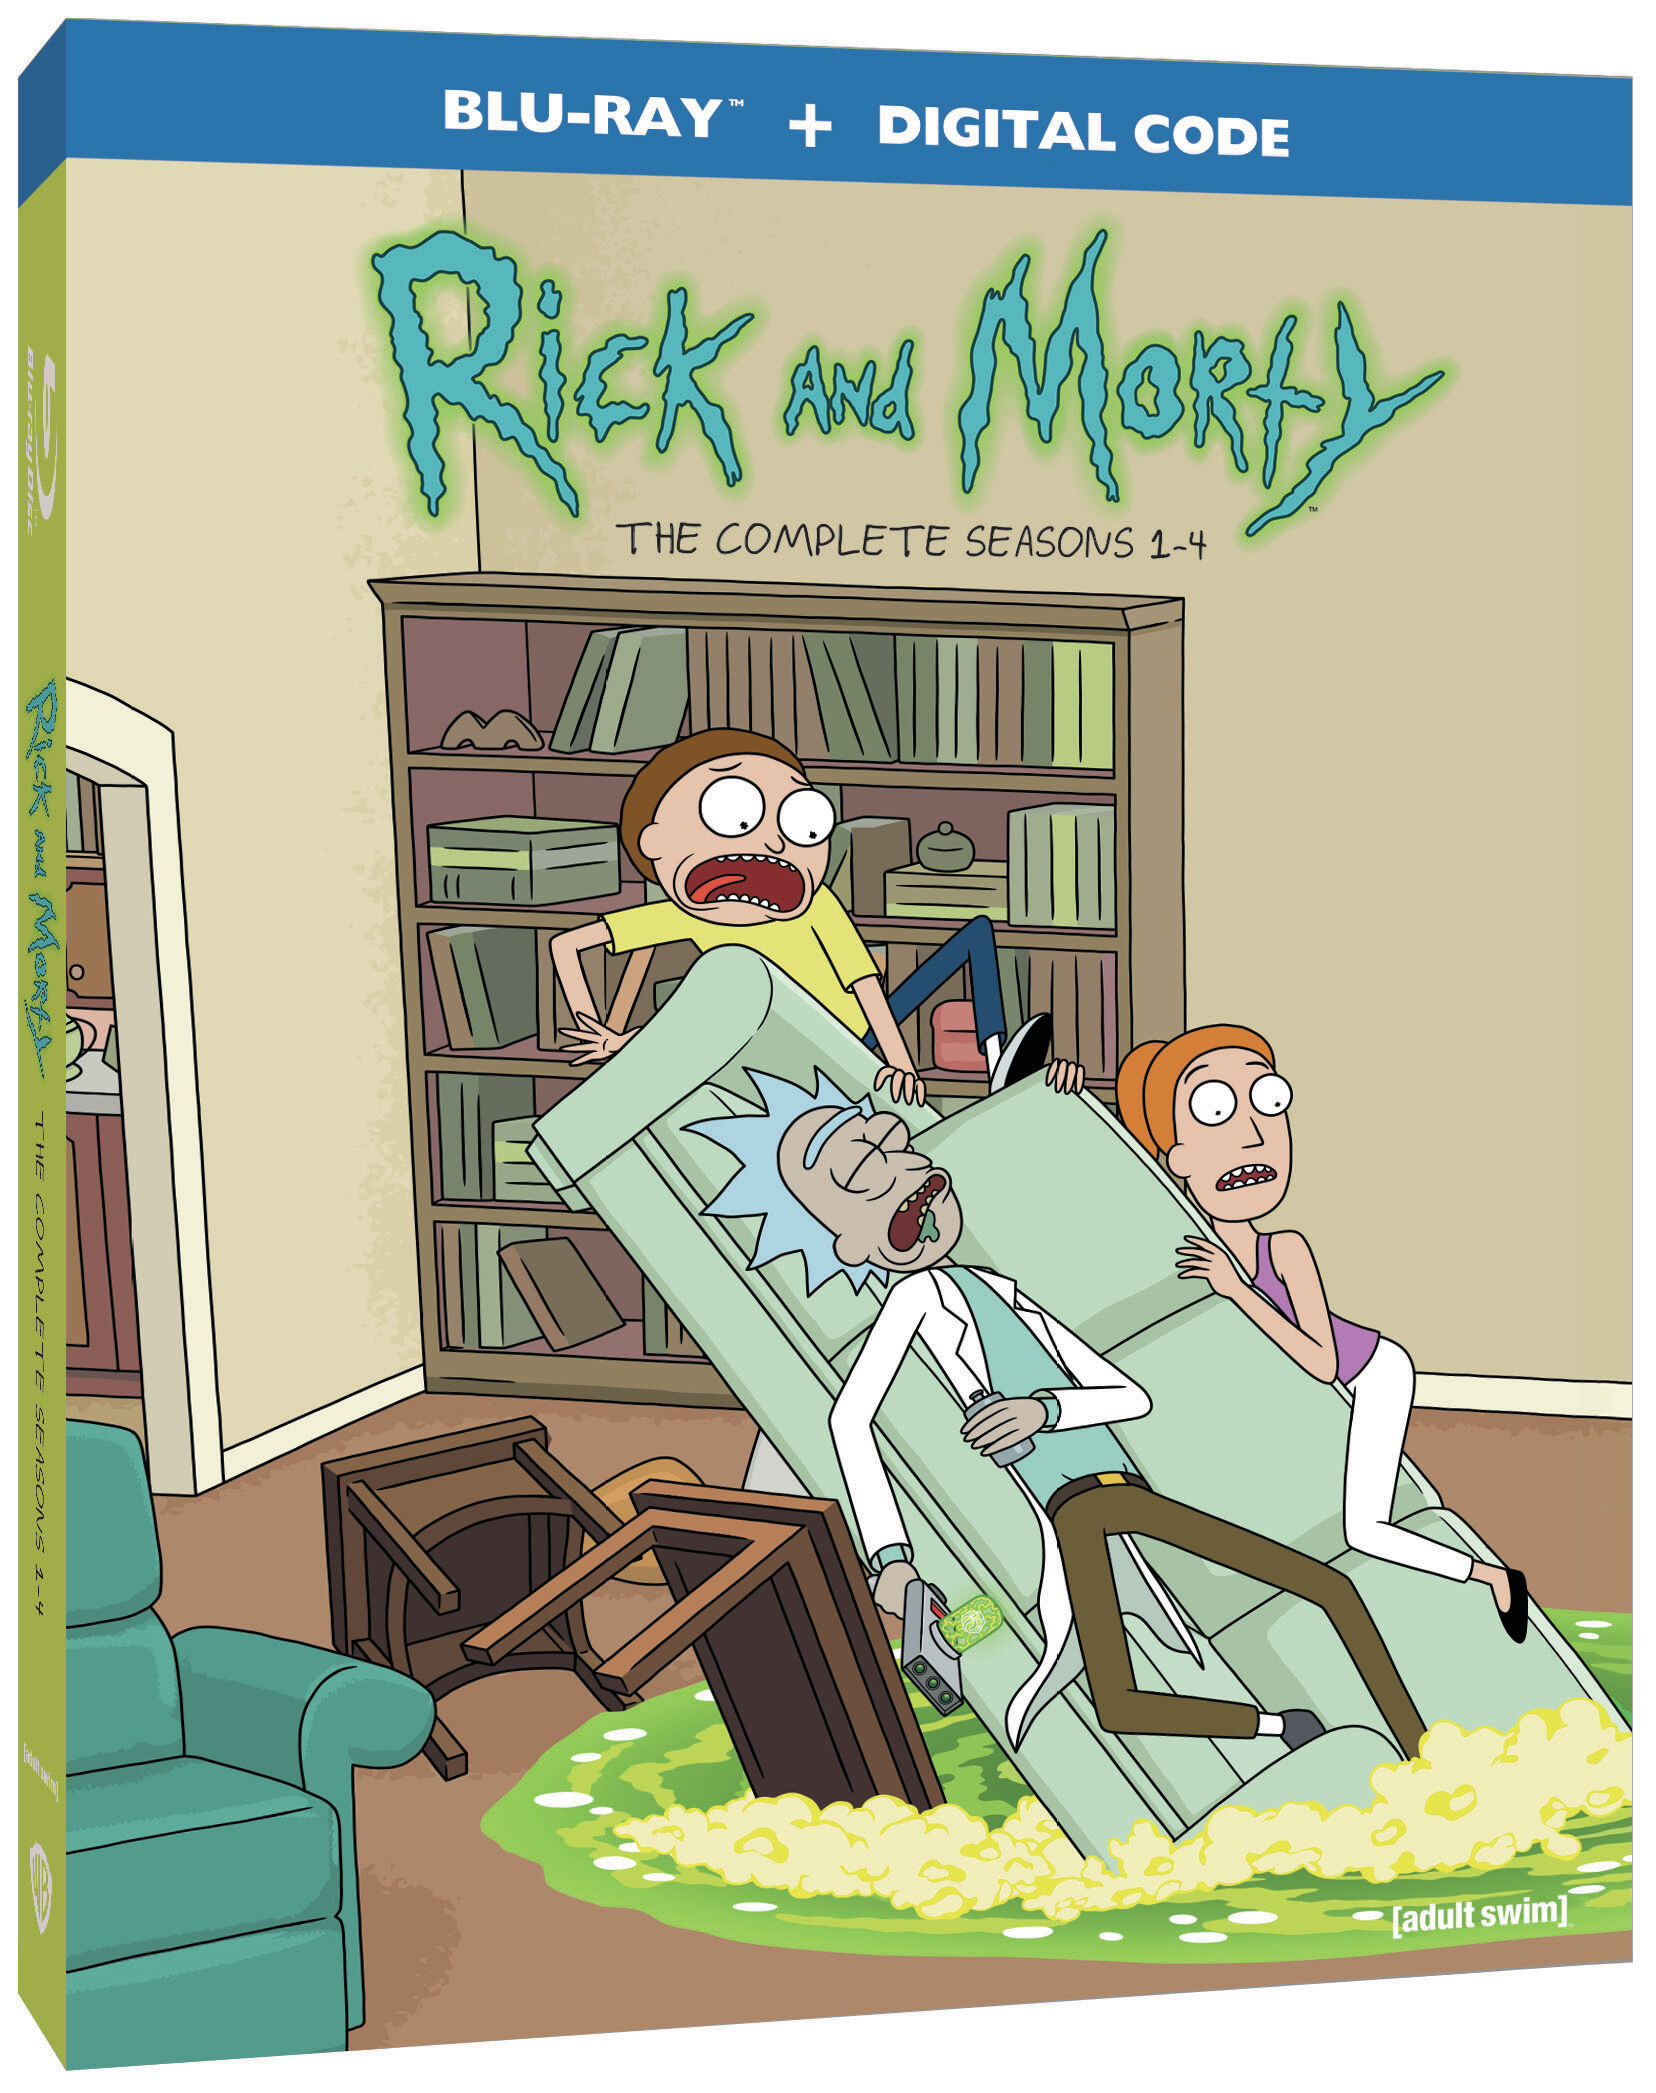 Rick and morty: seasons 1-4 on dvd & blu-ray march 2, 2021